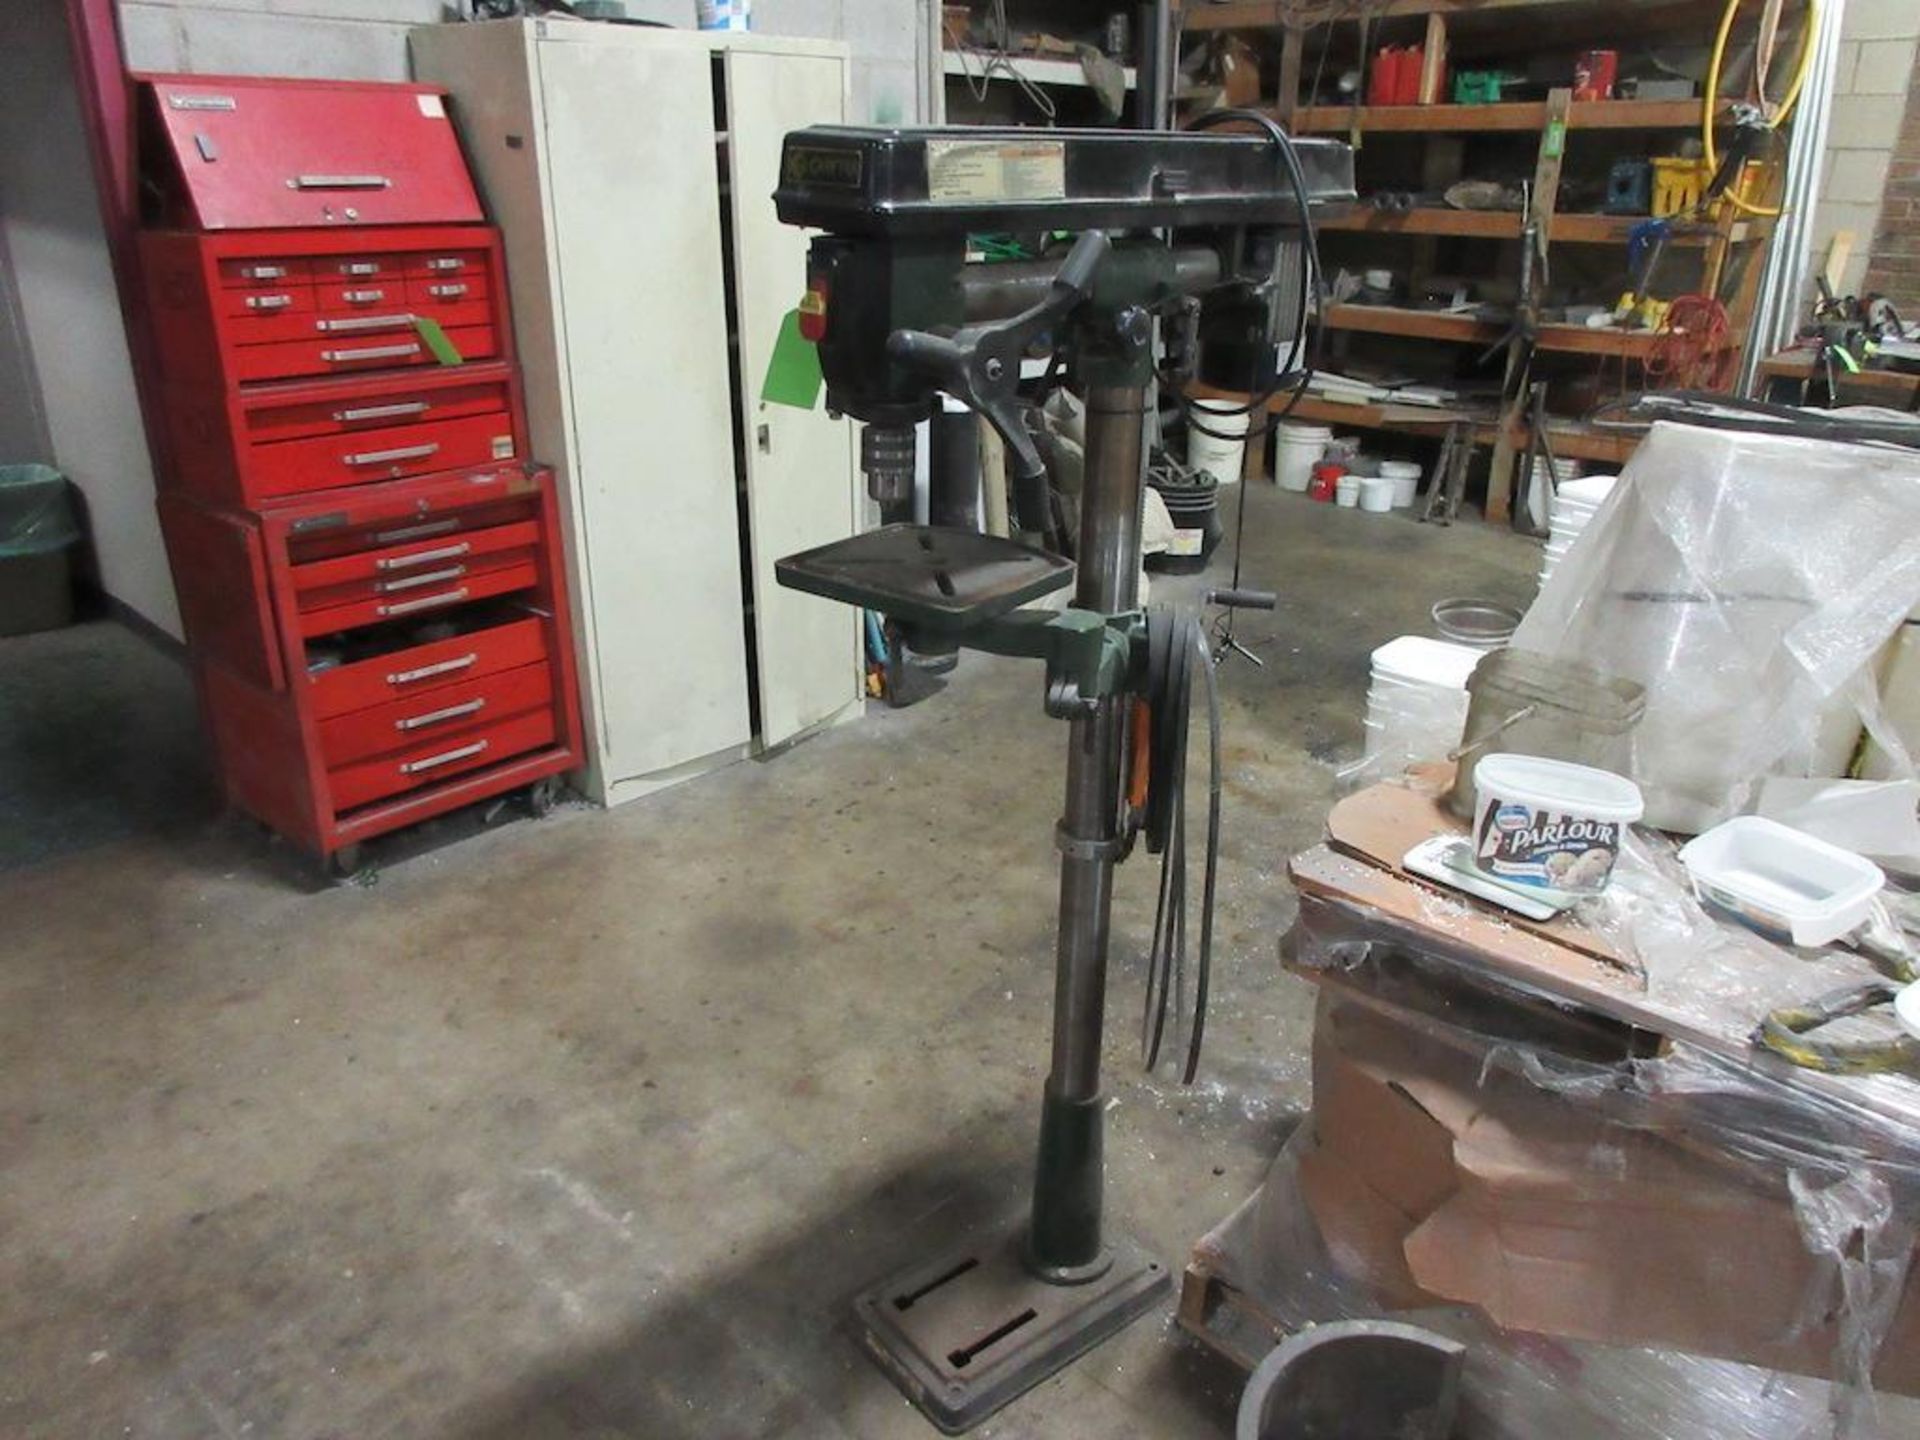 Craftex radial drill press, CT021N, 34" swing, 1/2 HP motor, 5 speed, drill chuck size 5/8", spindle